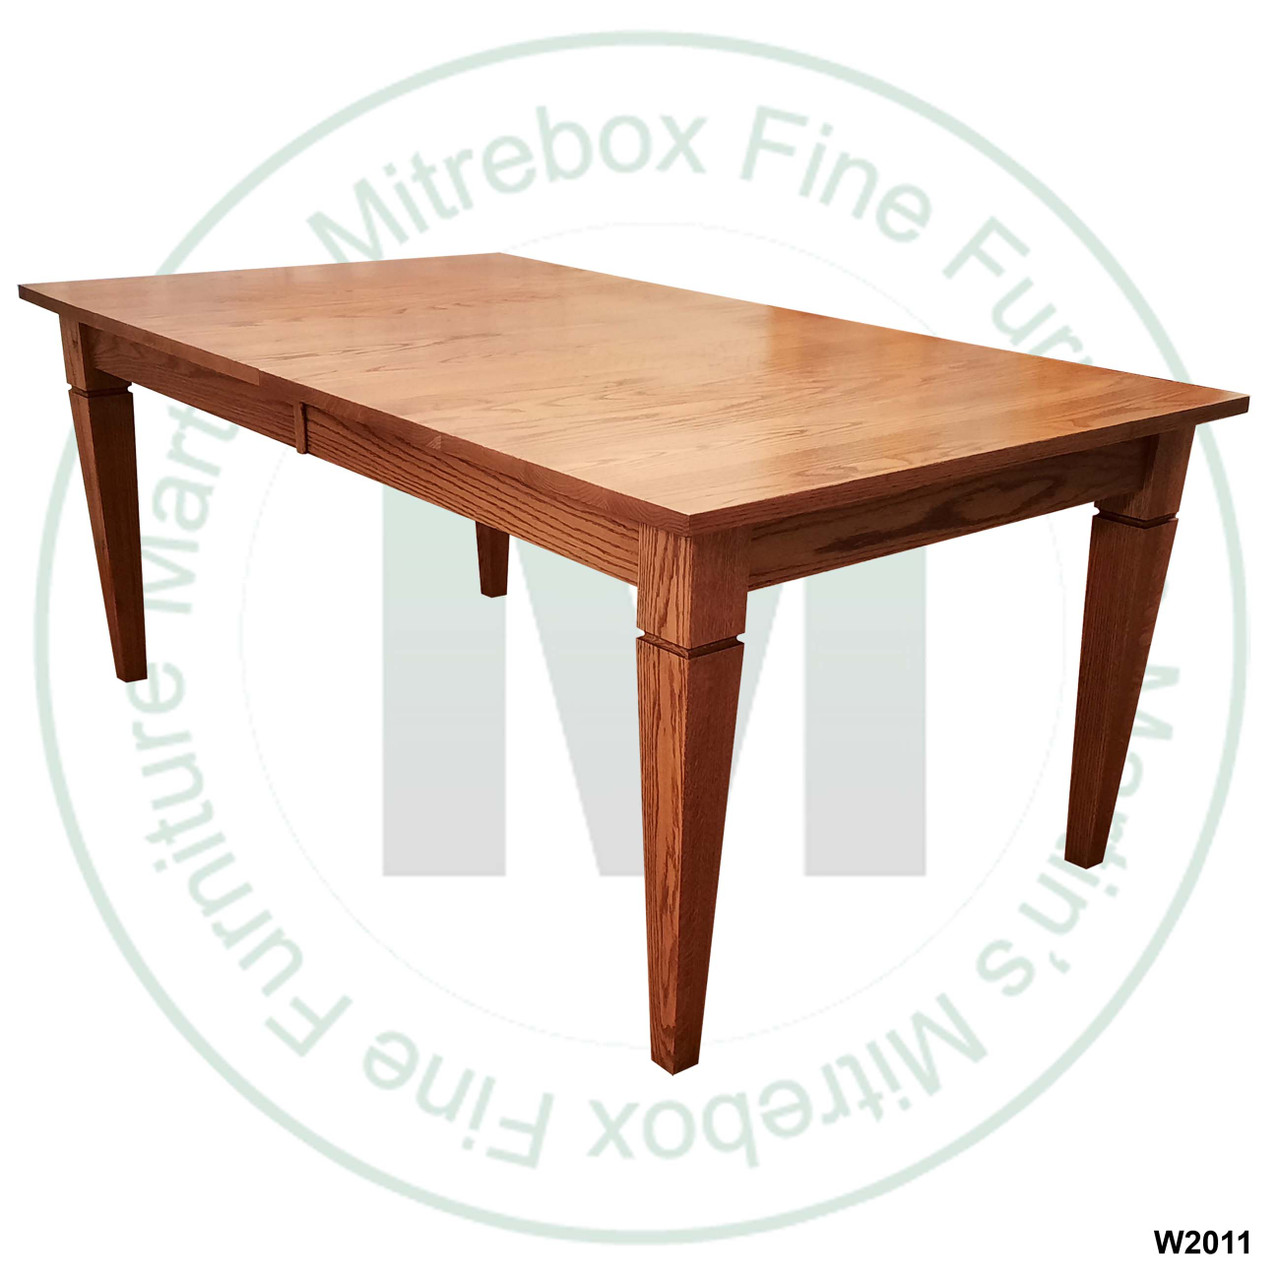 Oak Reesor Solid Top Harvest Table 36''D x 48''W x 30''H Table Has 1 3/4'' Thick Top And 2 - 16'' Extensions